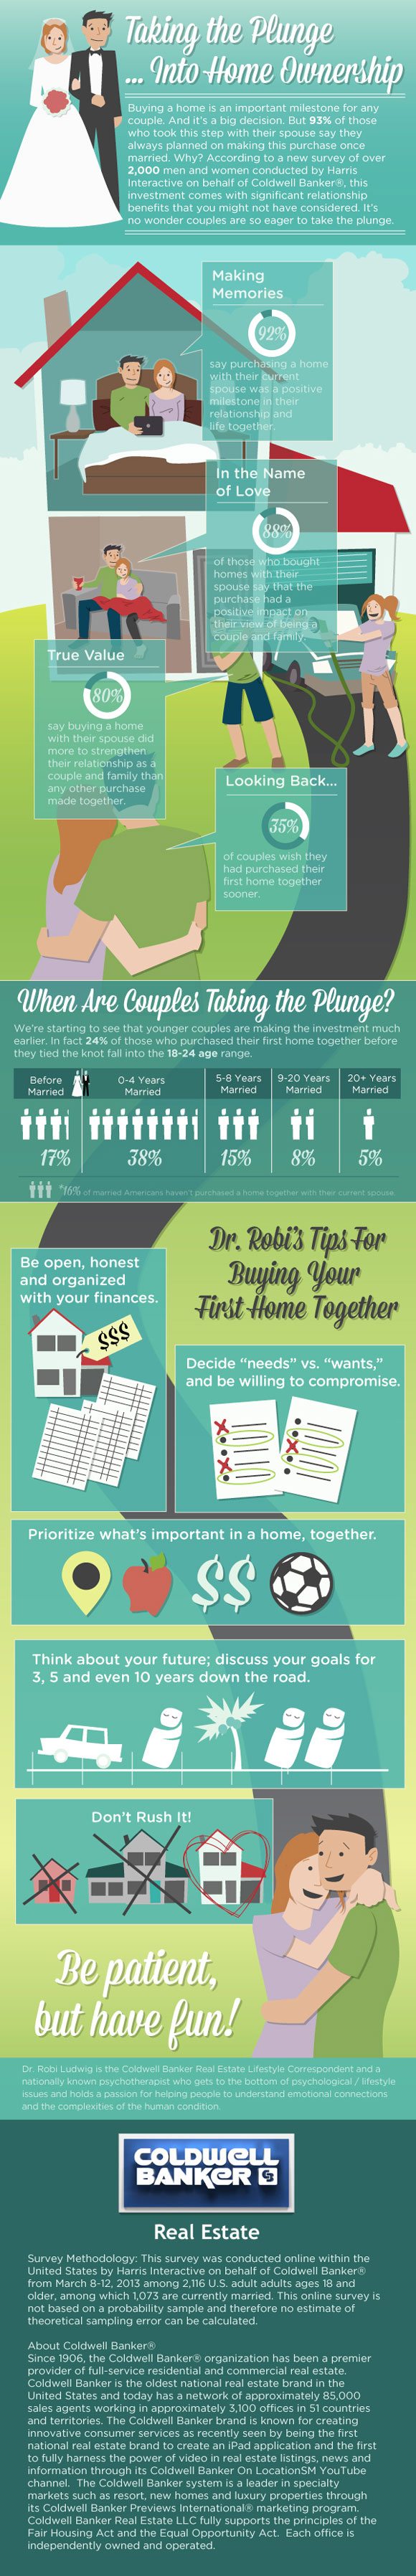 engaged-home-buyers-infographic